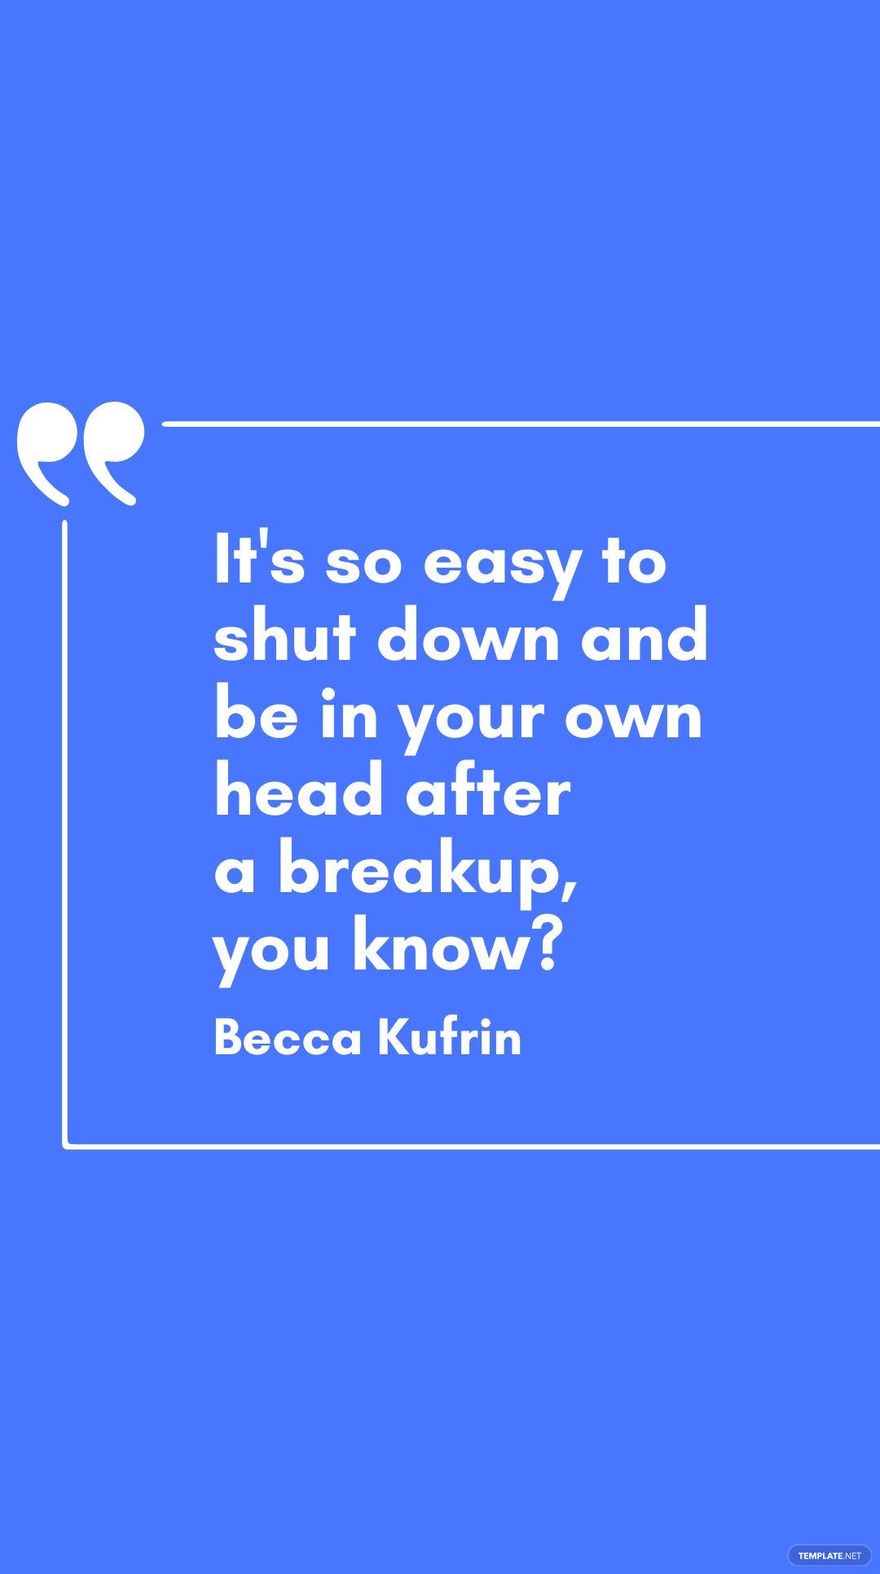 Becca Kufrin - It's so easy to shut down and be in your own head after a breakup, you know? in JPG